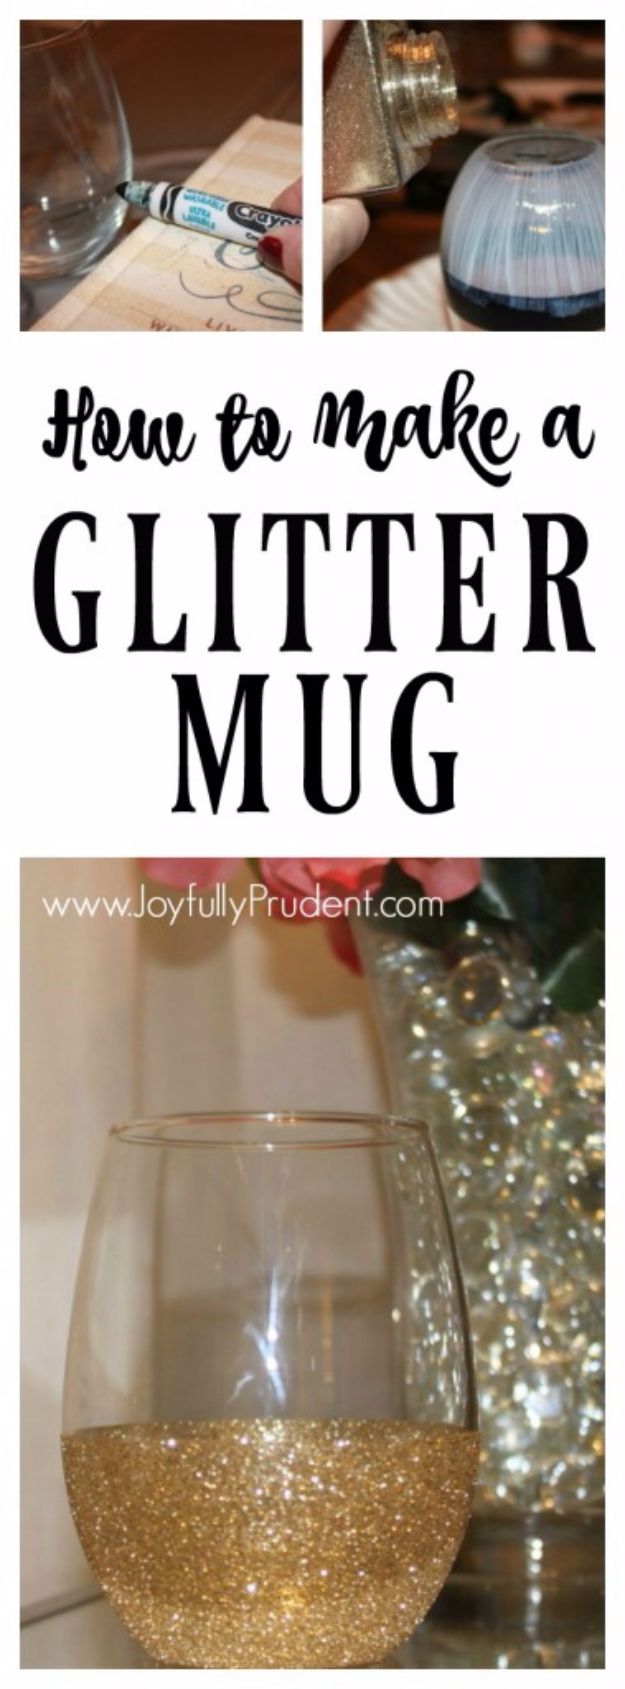 Mod Podge Crafts - Glitter Dipped Mug And Wine Glass - DIY Modge Podge Ideas On Wood, Glass, Canvases, Fabric, Paper and Mason Jars - How To Make Pictures, Home Decor, Easy Craft Ideas and DIY Wall Art for Beginners - Cute, Cheap Crafty Homemade Gifts for Christmas and Birthday Presents 